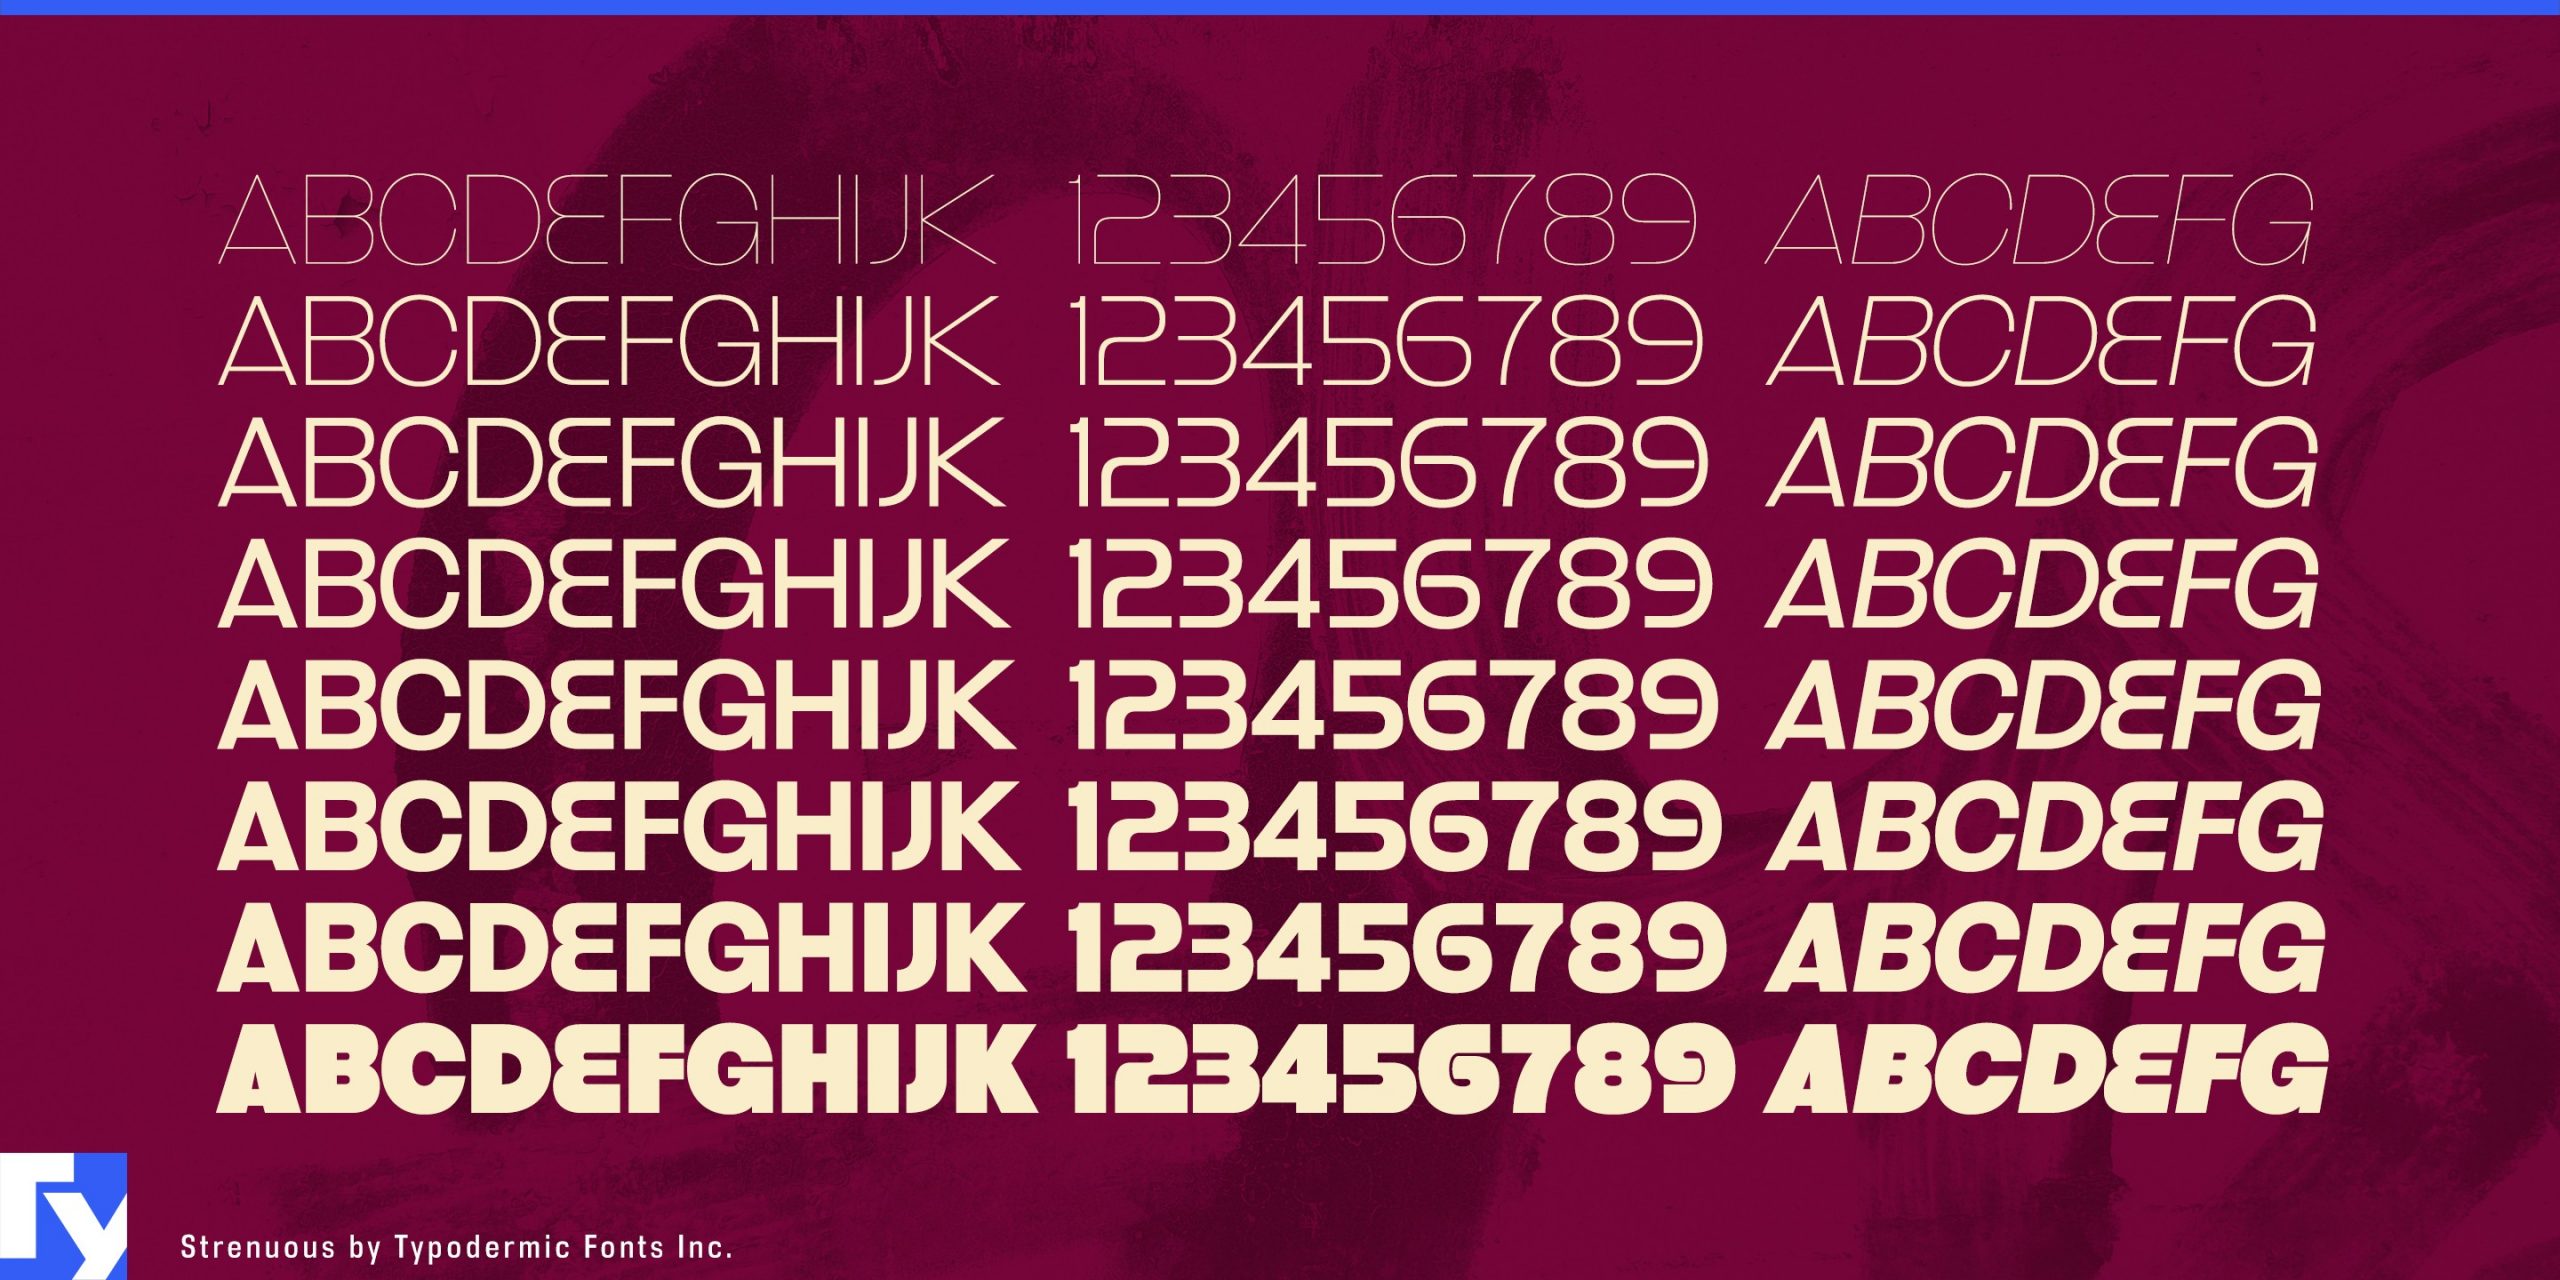 Experience the versatility of the Strenuous typeface in eight weights and italics.